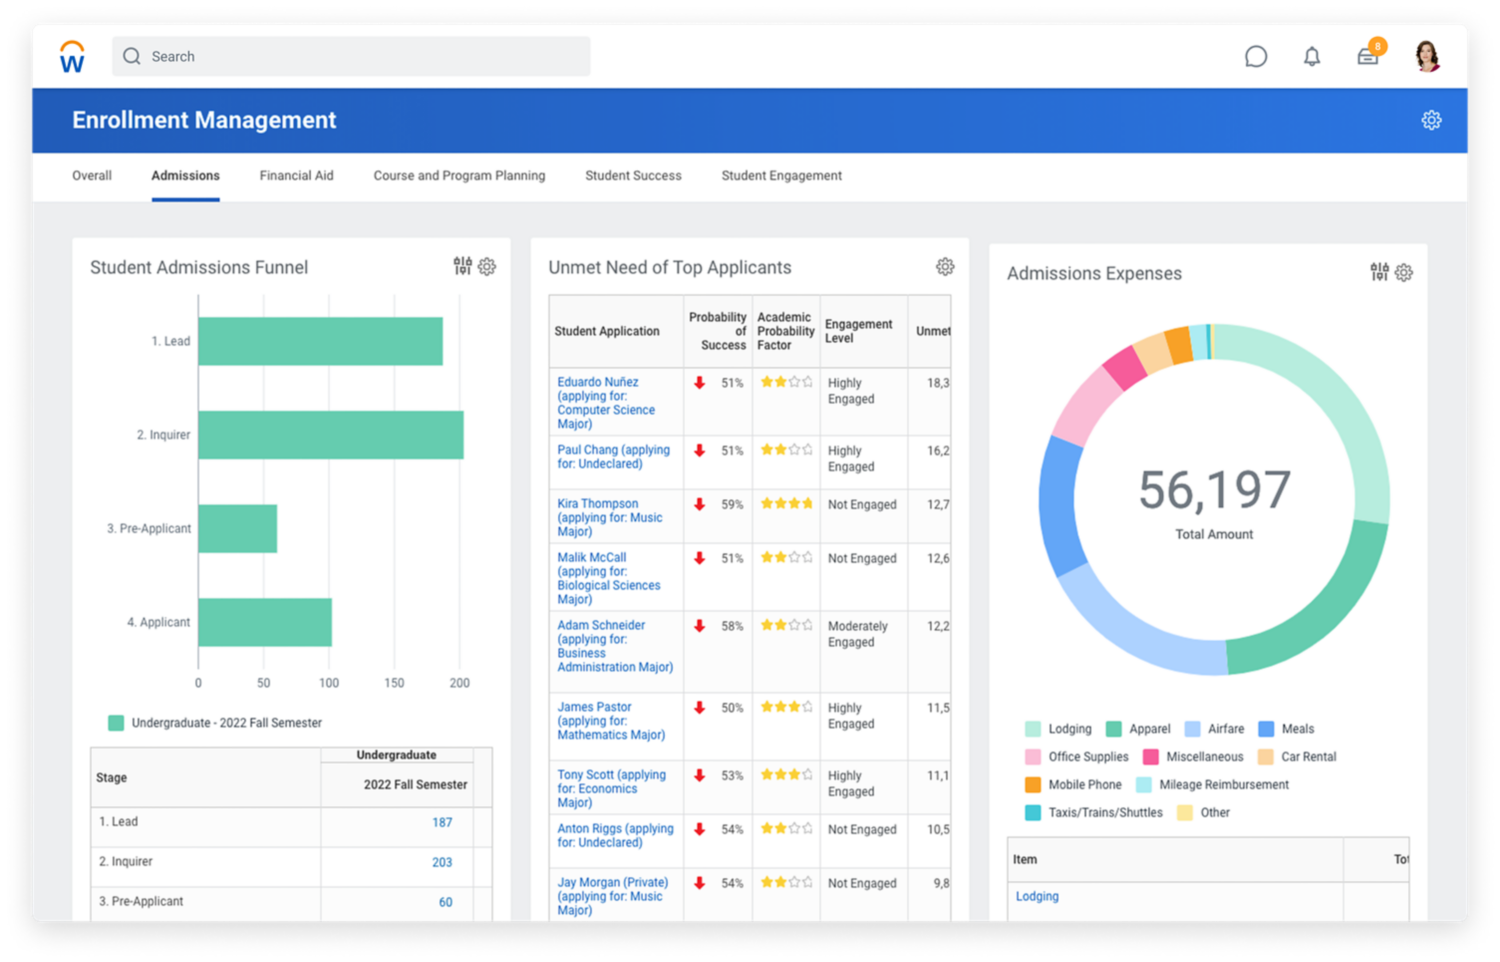 Enrollment Management dashboard displaying Student Admissions Funnel, Unmet Need of Top Applicants, and Admissions Expenses data analysis.